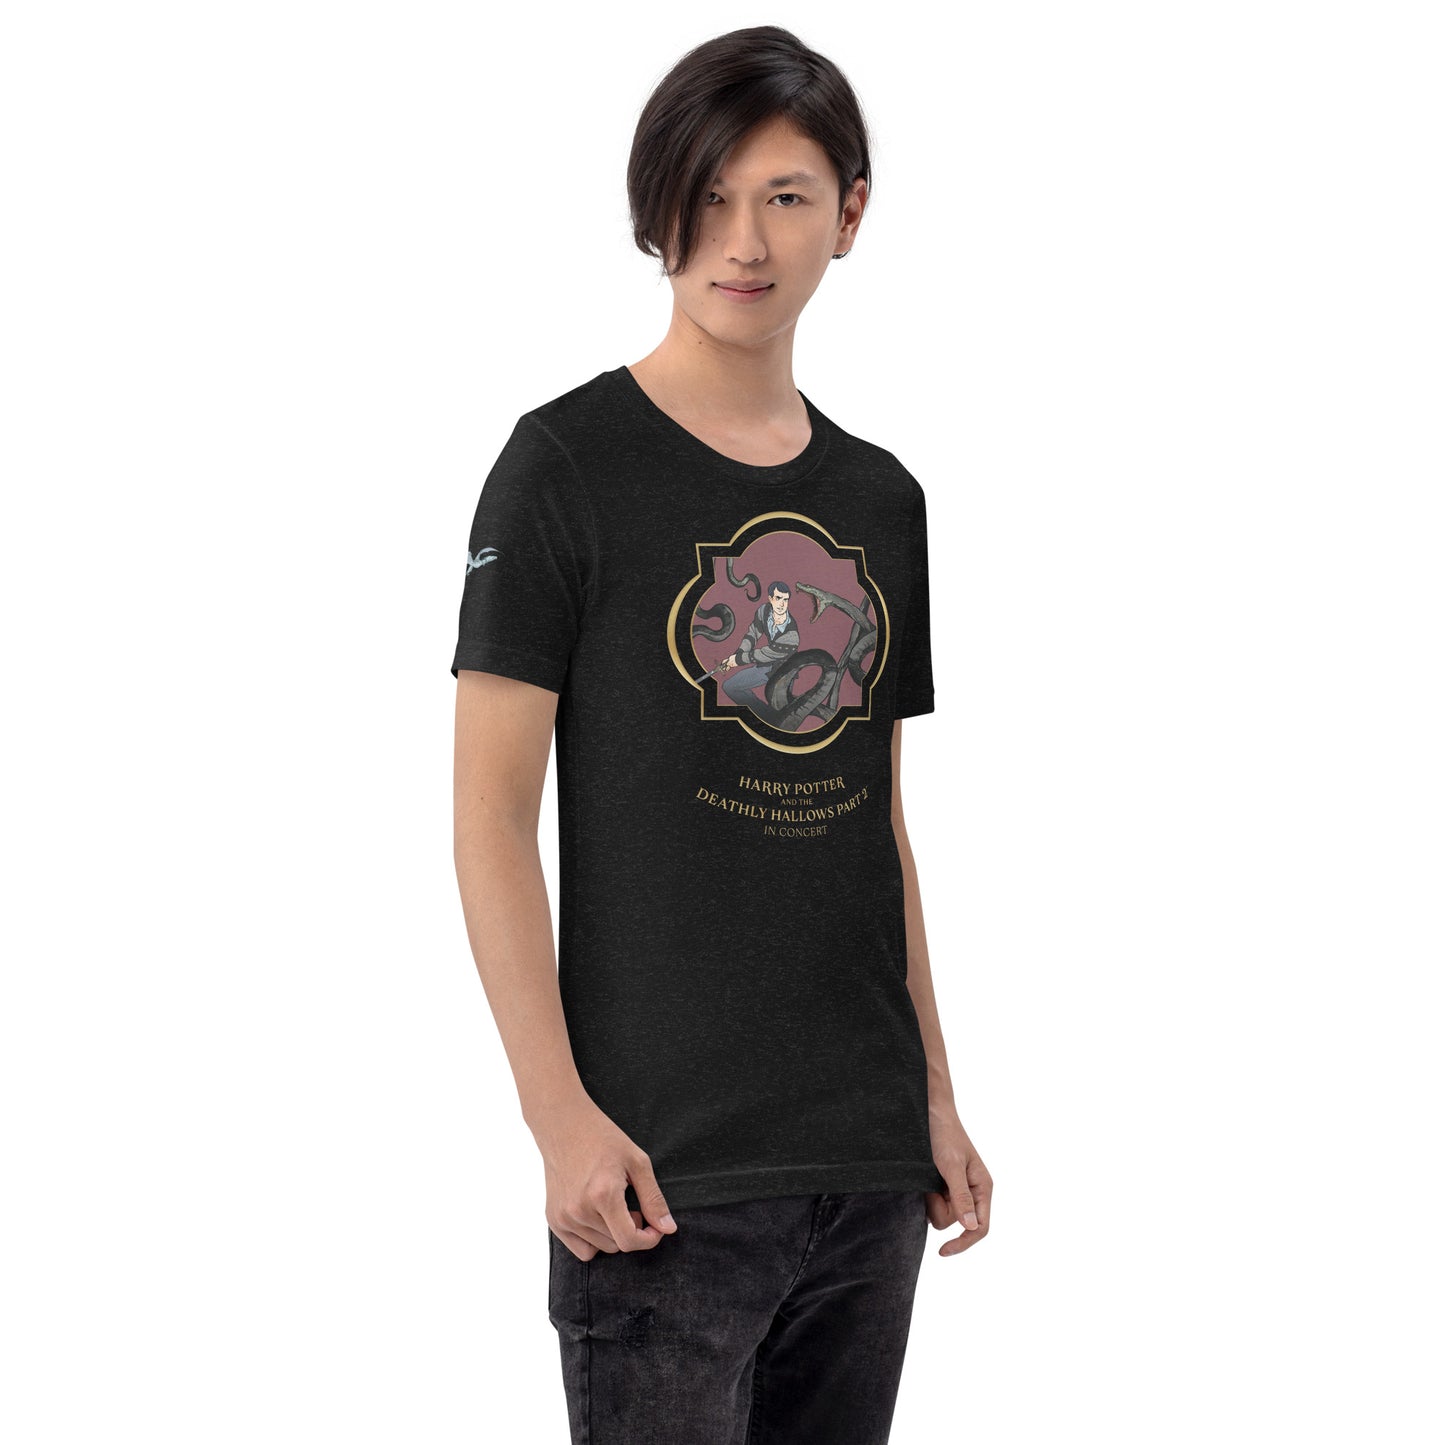 Harry Potter and the Deathly Hallows™ - Part 2 Unisex T-Shirt (Neville)